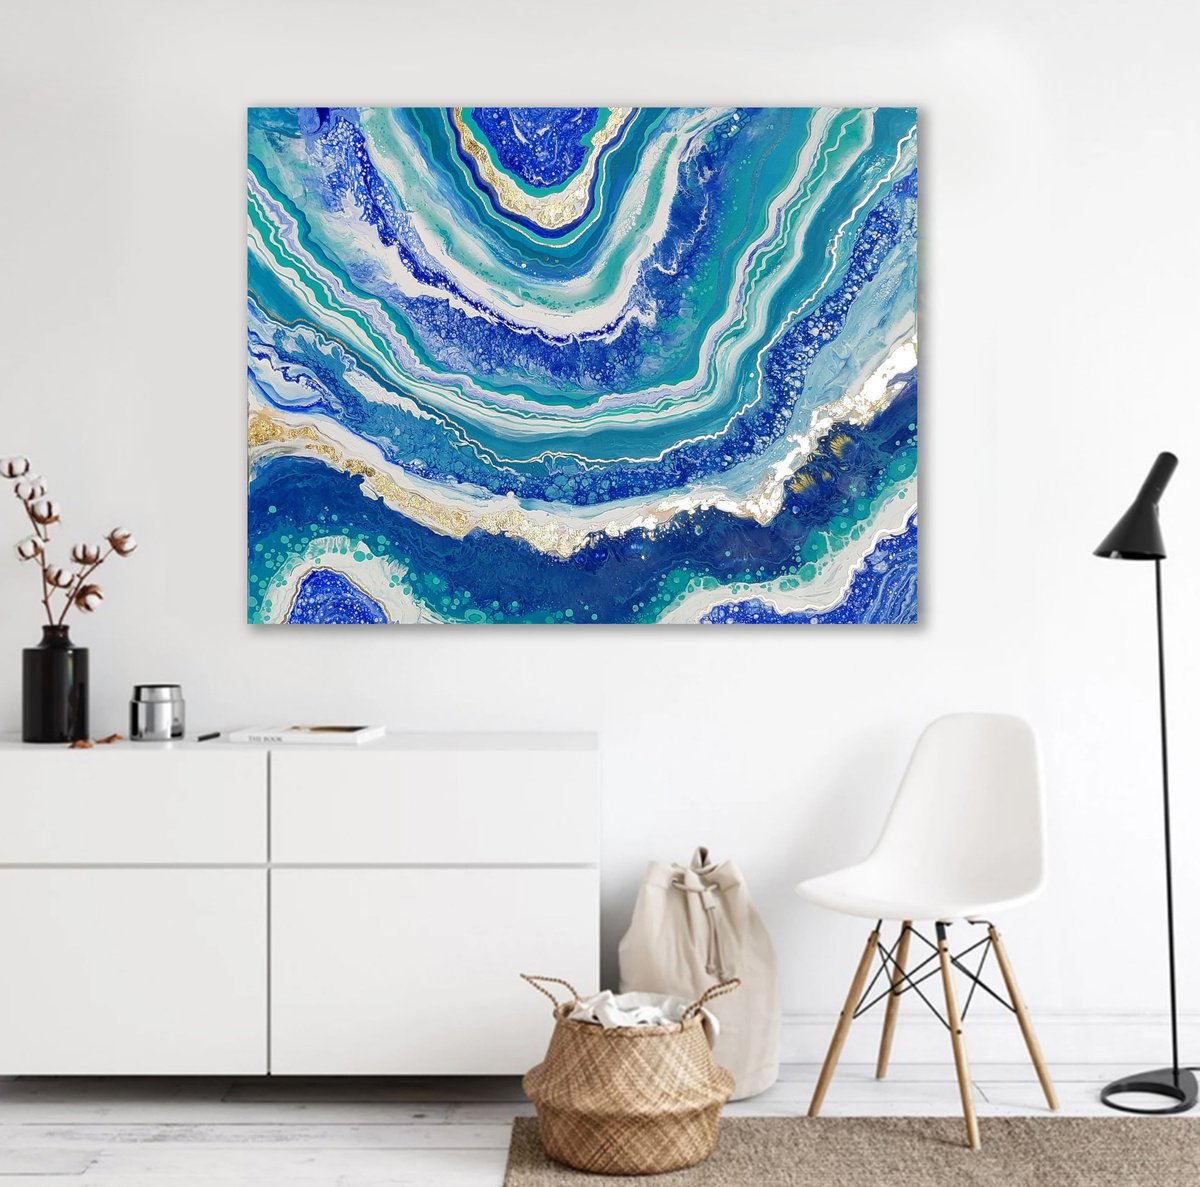 110x85cm. / The gold within the ocean waves original abstract painting, office art, home... by Alexandra Dobreikin